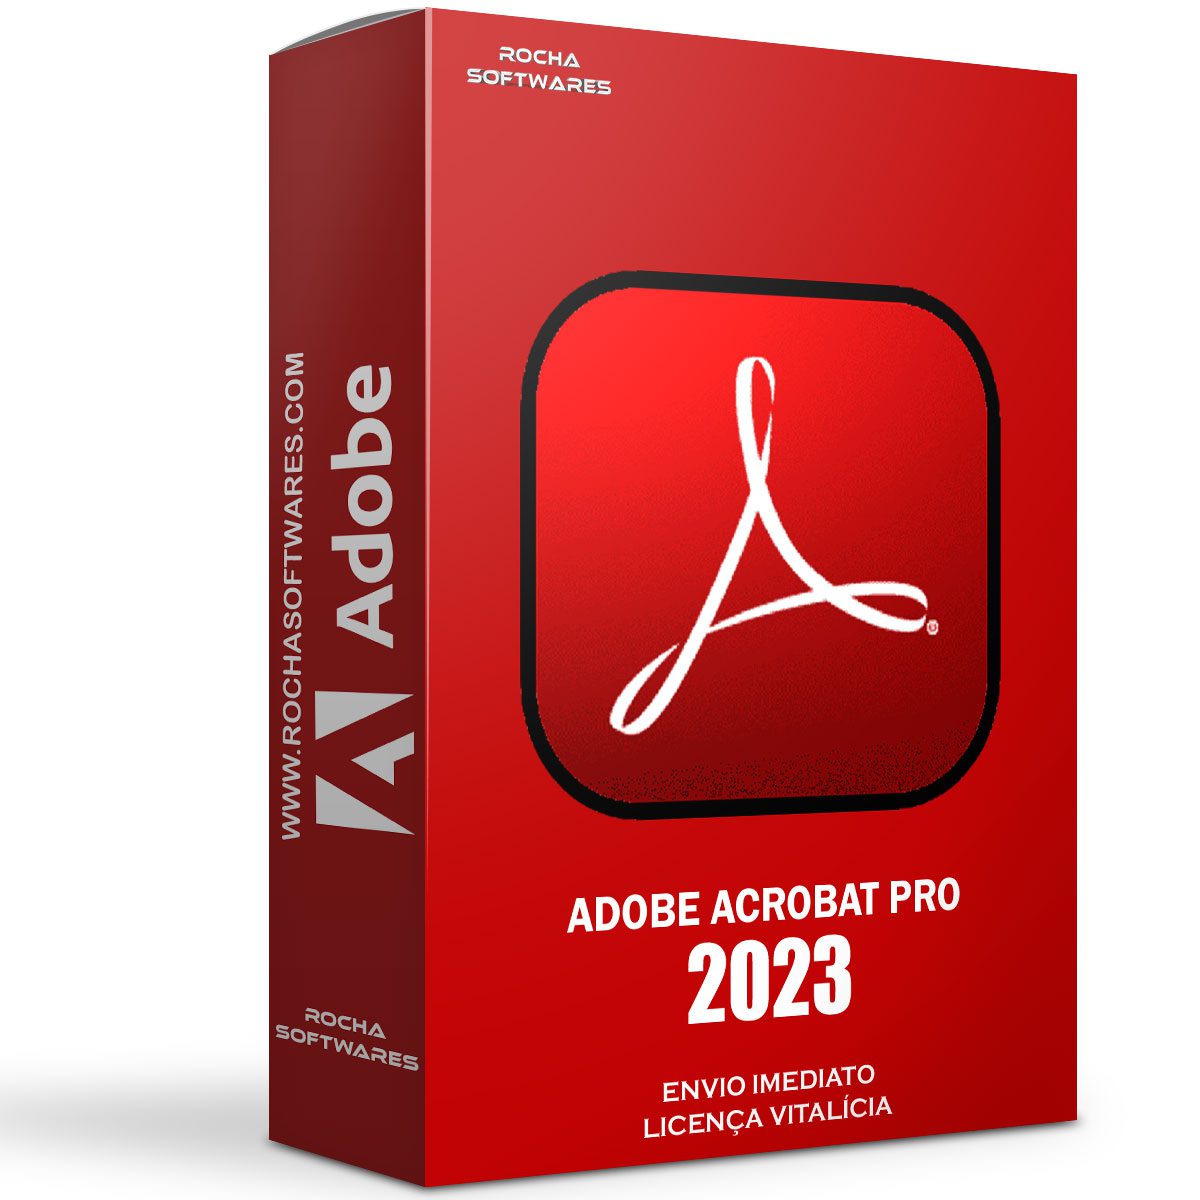 Adobe Acrobat Pro 2020 23: The latest version of Adobe Acrobat Pro DC, a powerful software for creating, editing, and managing PDF documents.